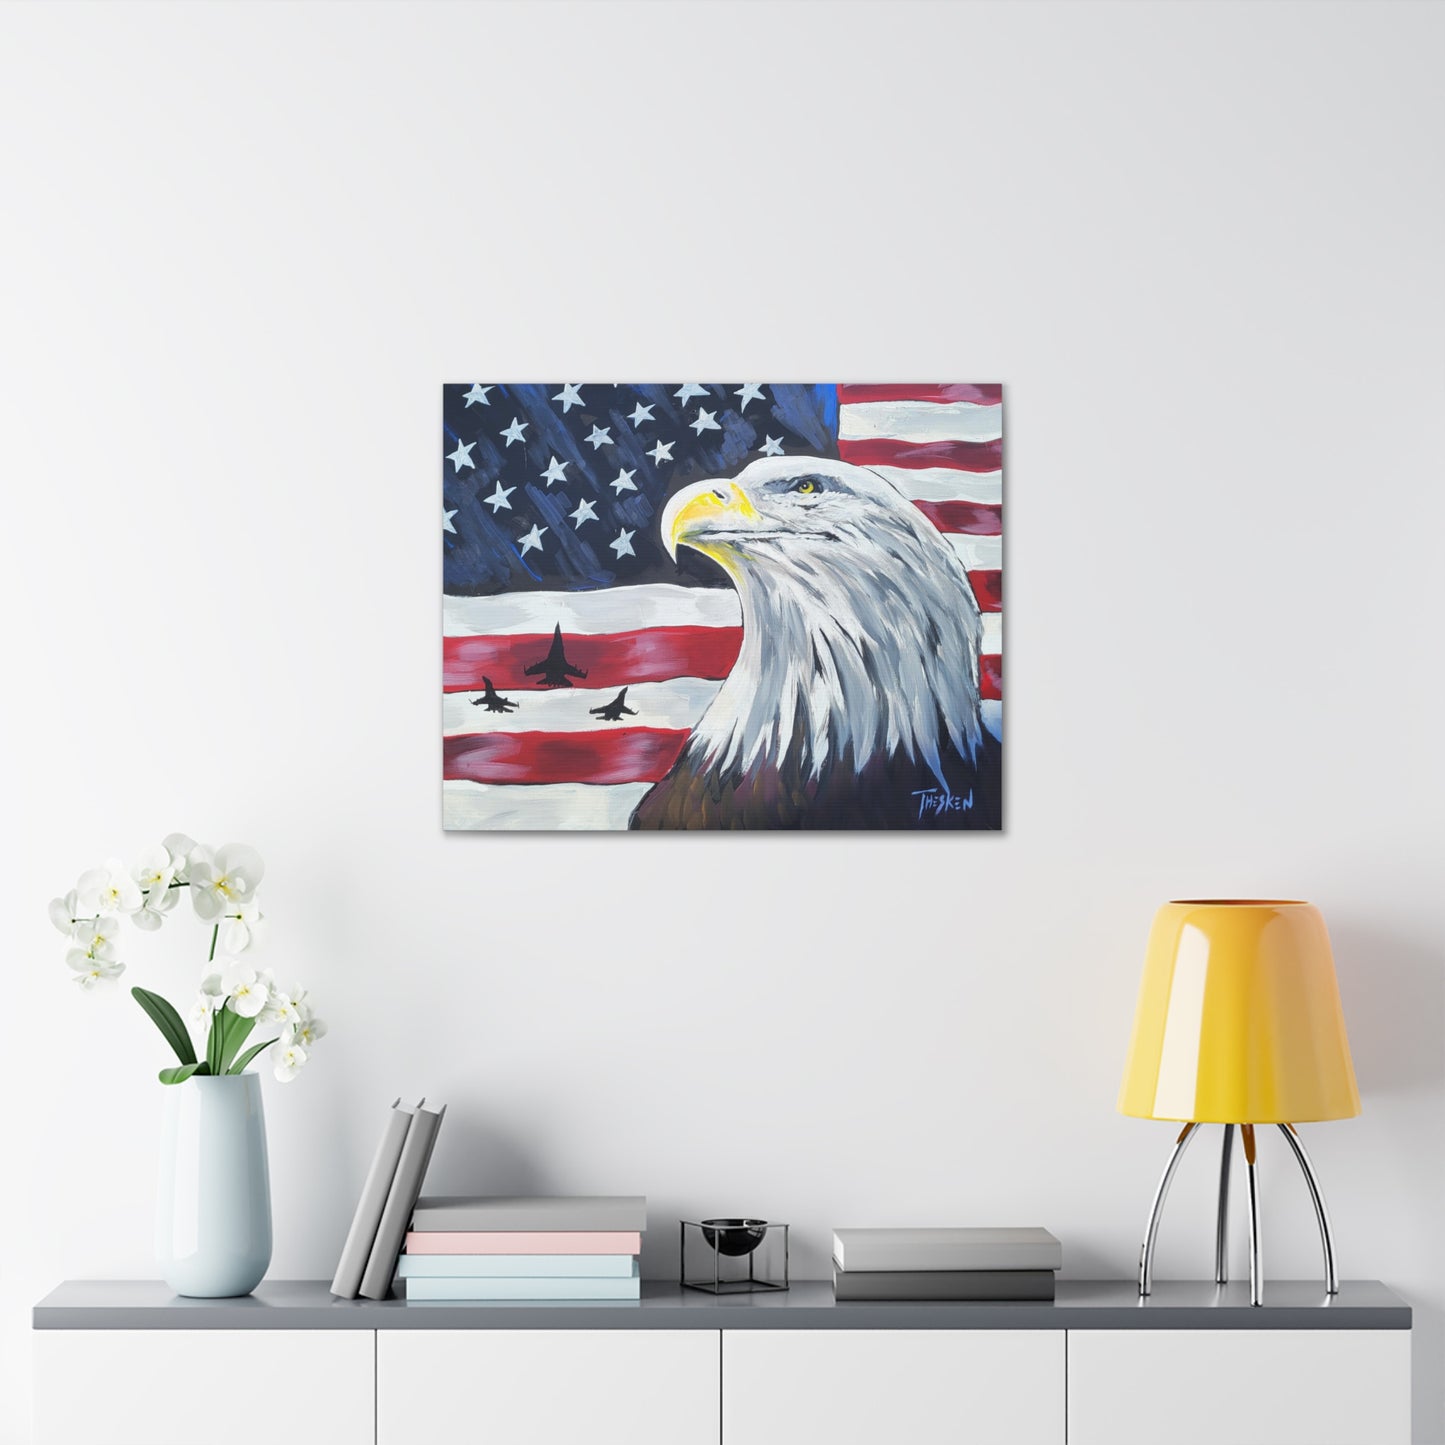 EAGLE JETS ON CANVAS